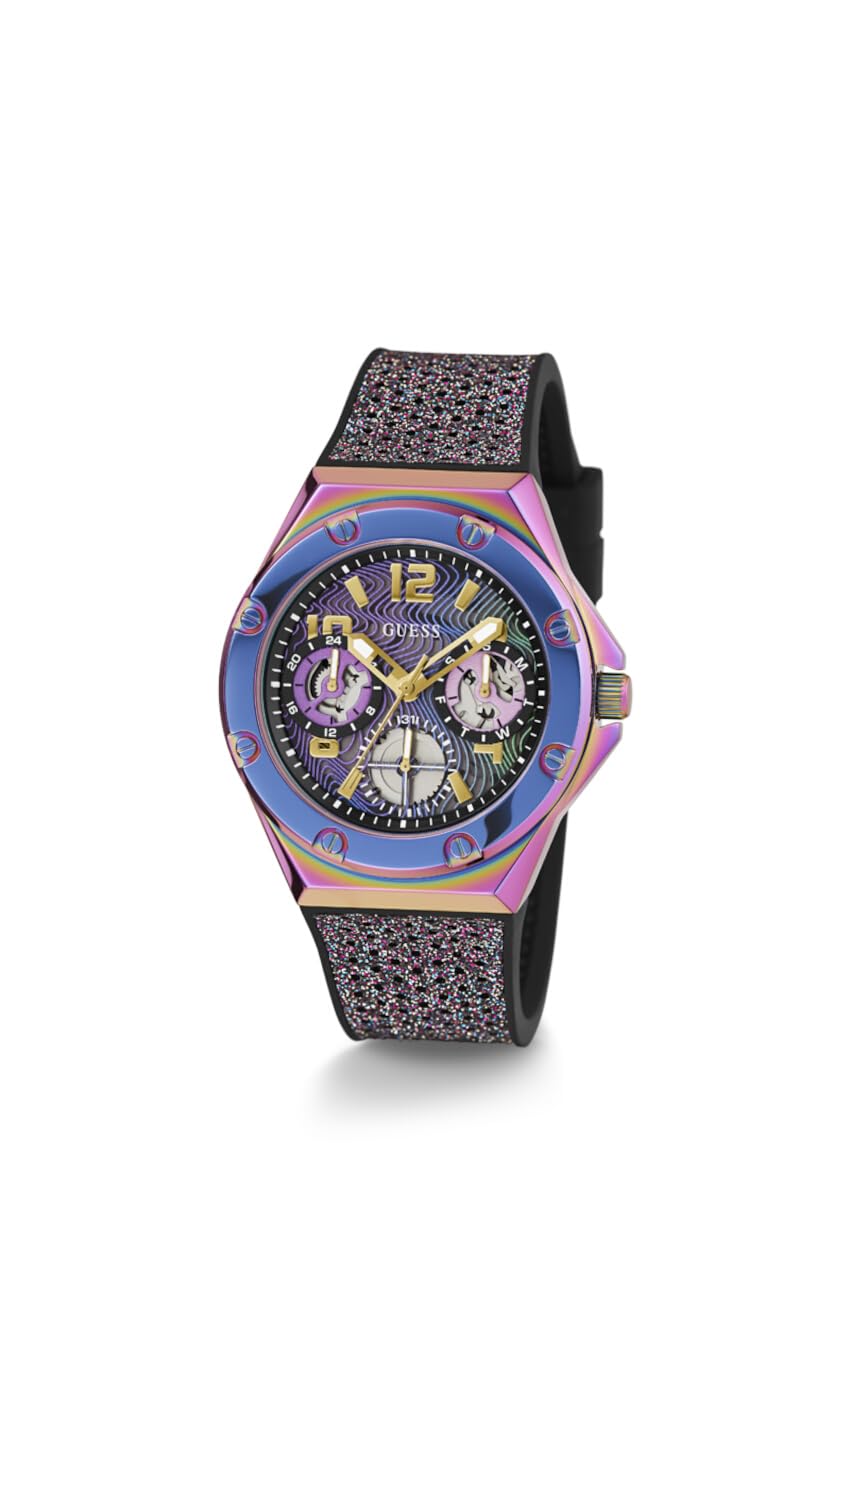 GUESS Women's 40mm Watch - Multi-Color Strap Multi Dial Iridescent Case